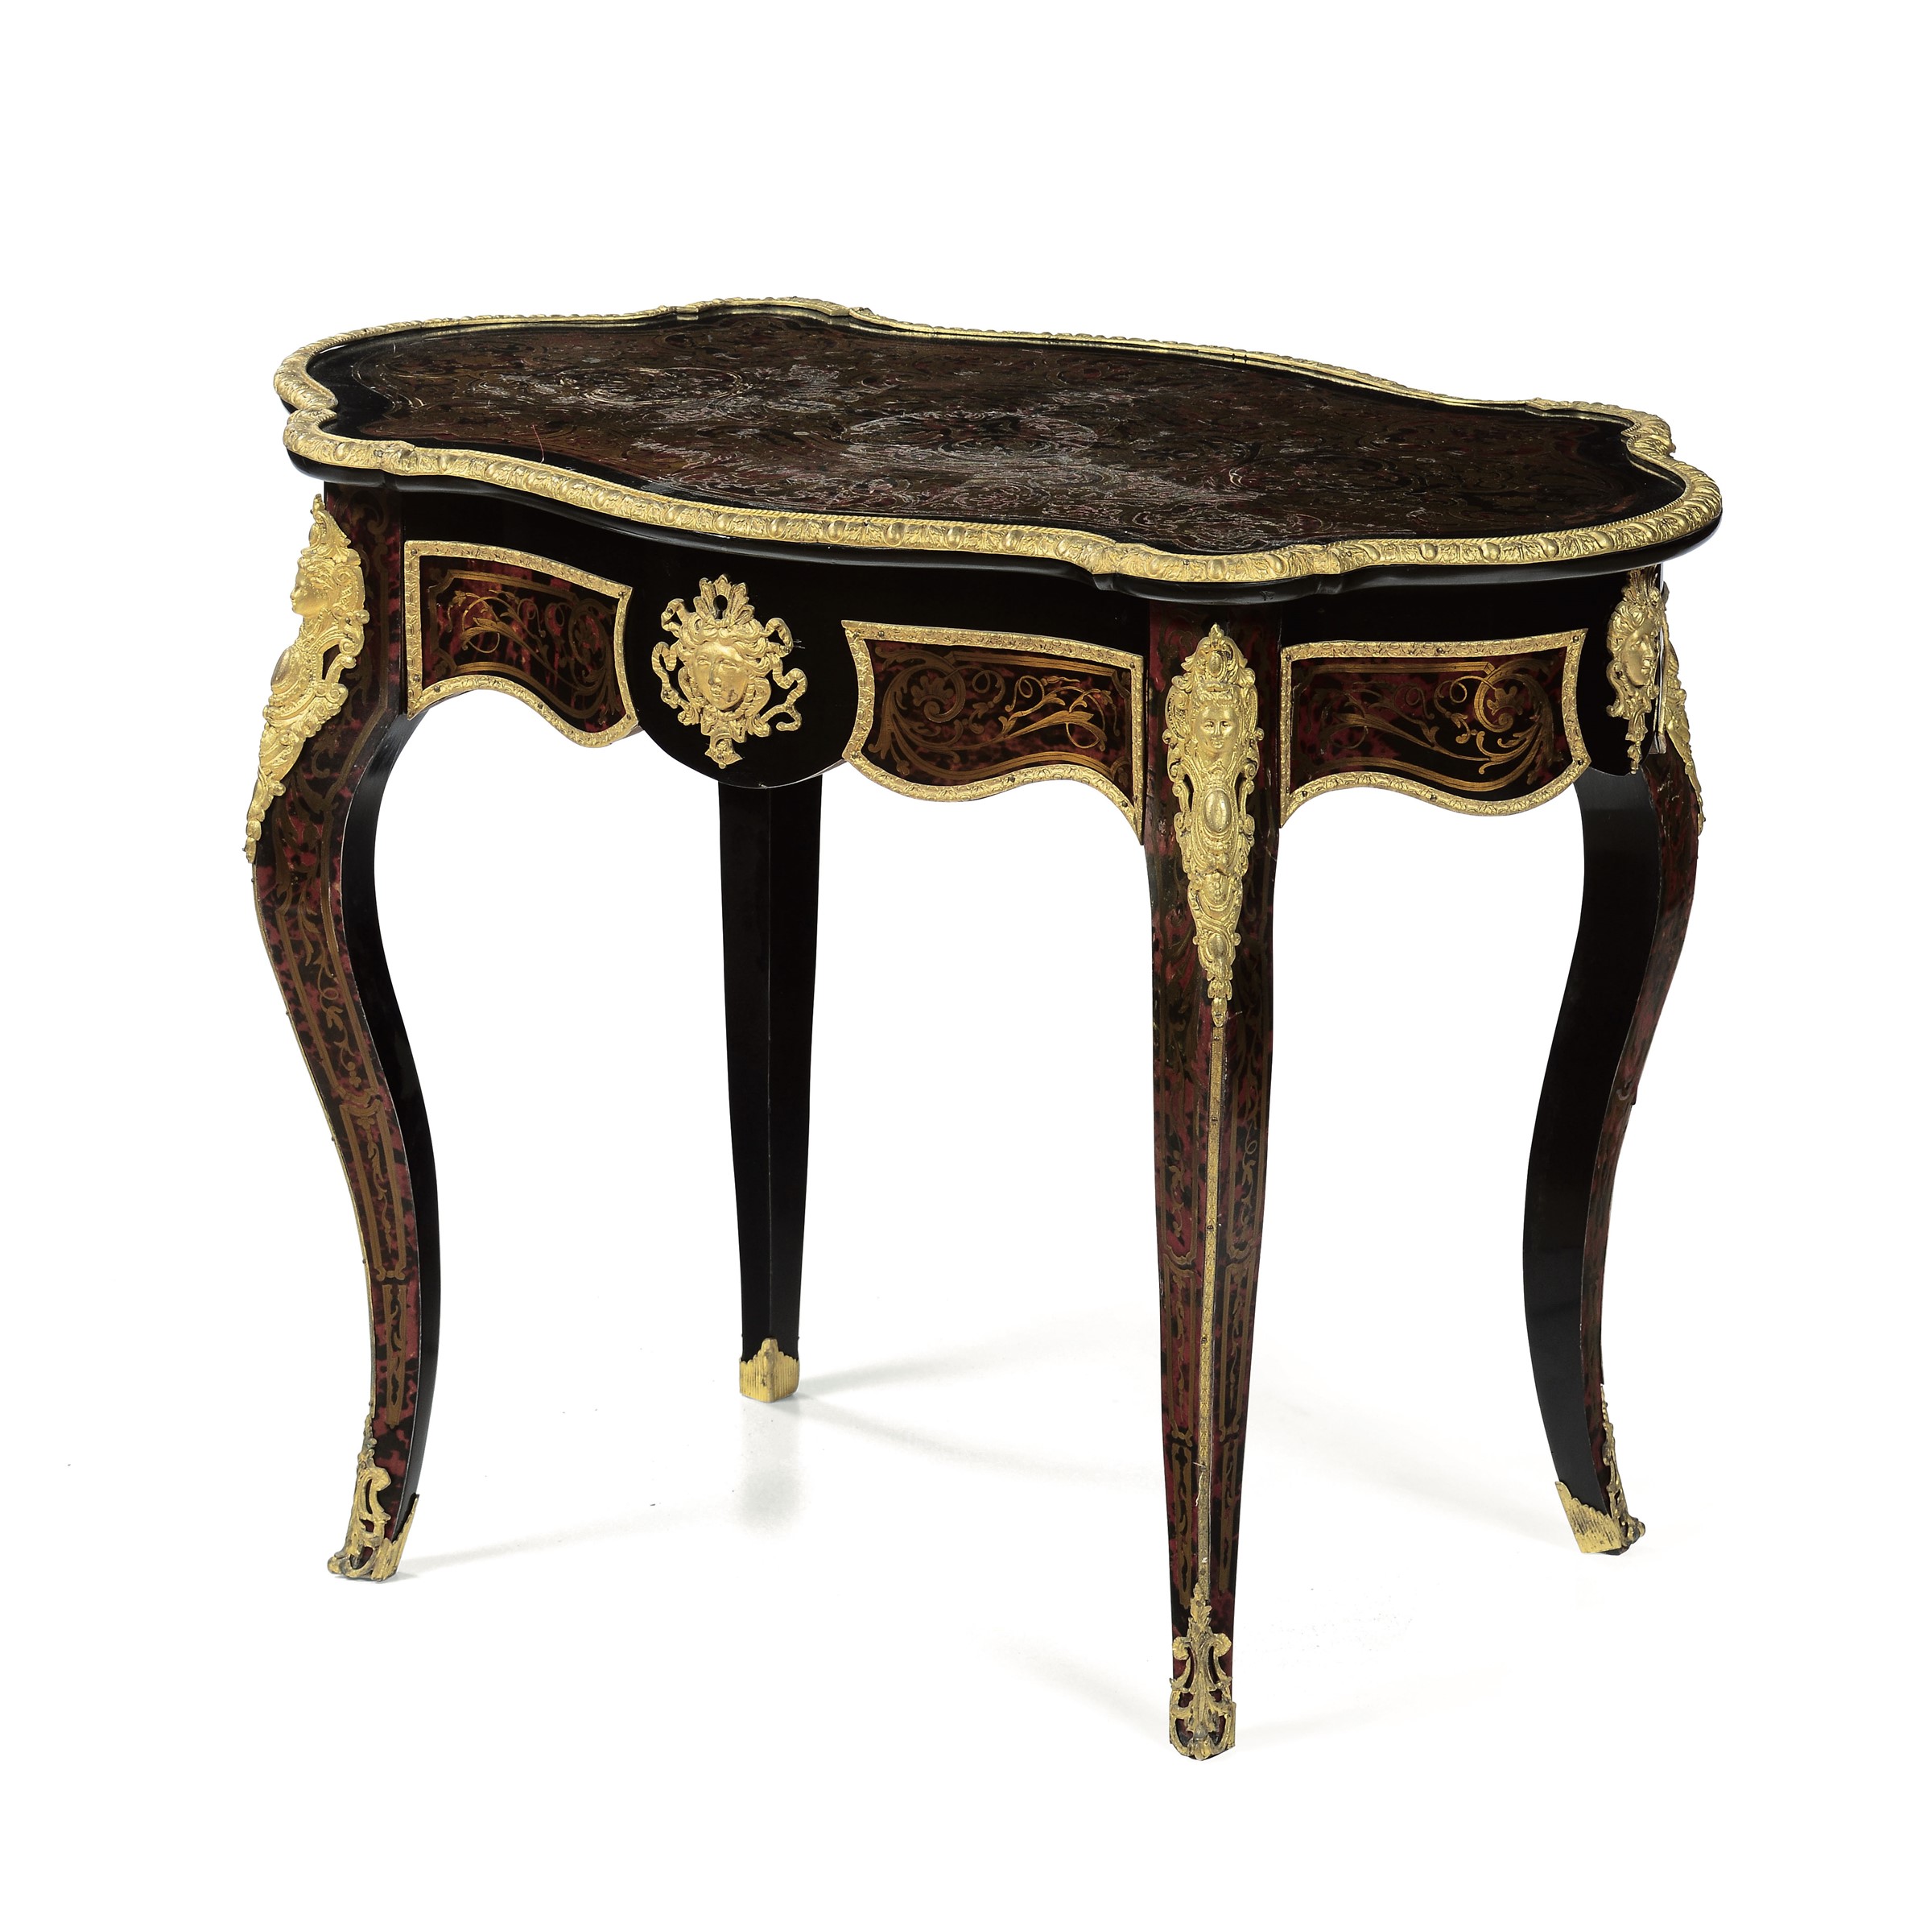 A Napoleon III table, 19th century - Ebonised wood with a gilt metal Boulle decor. [...]